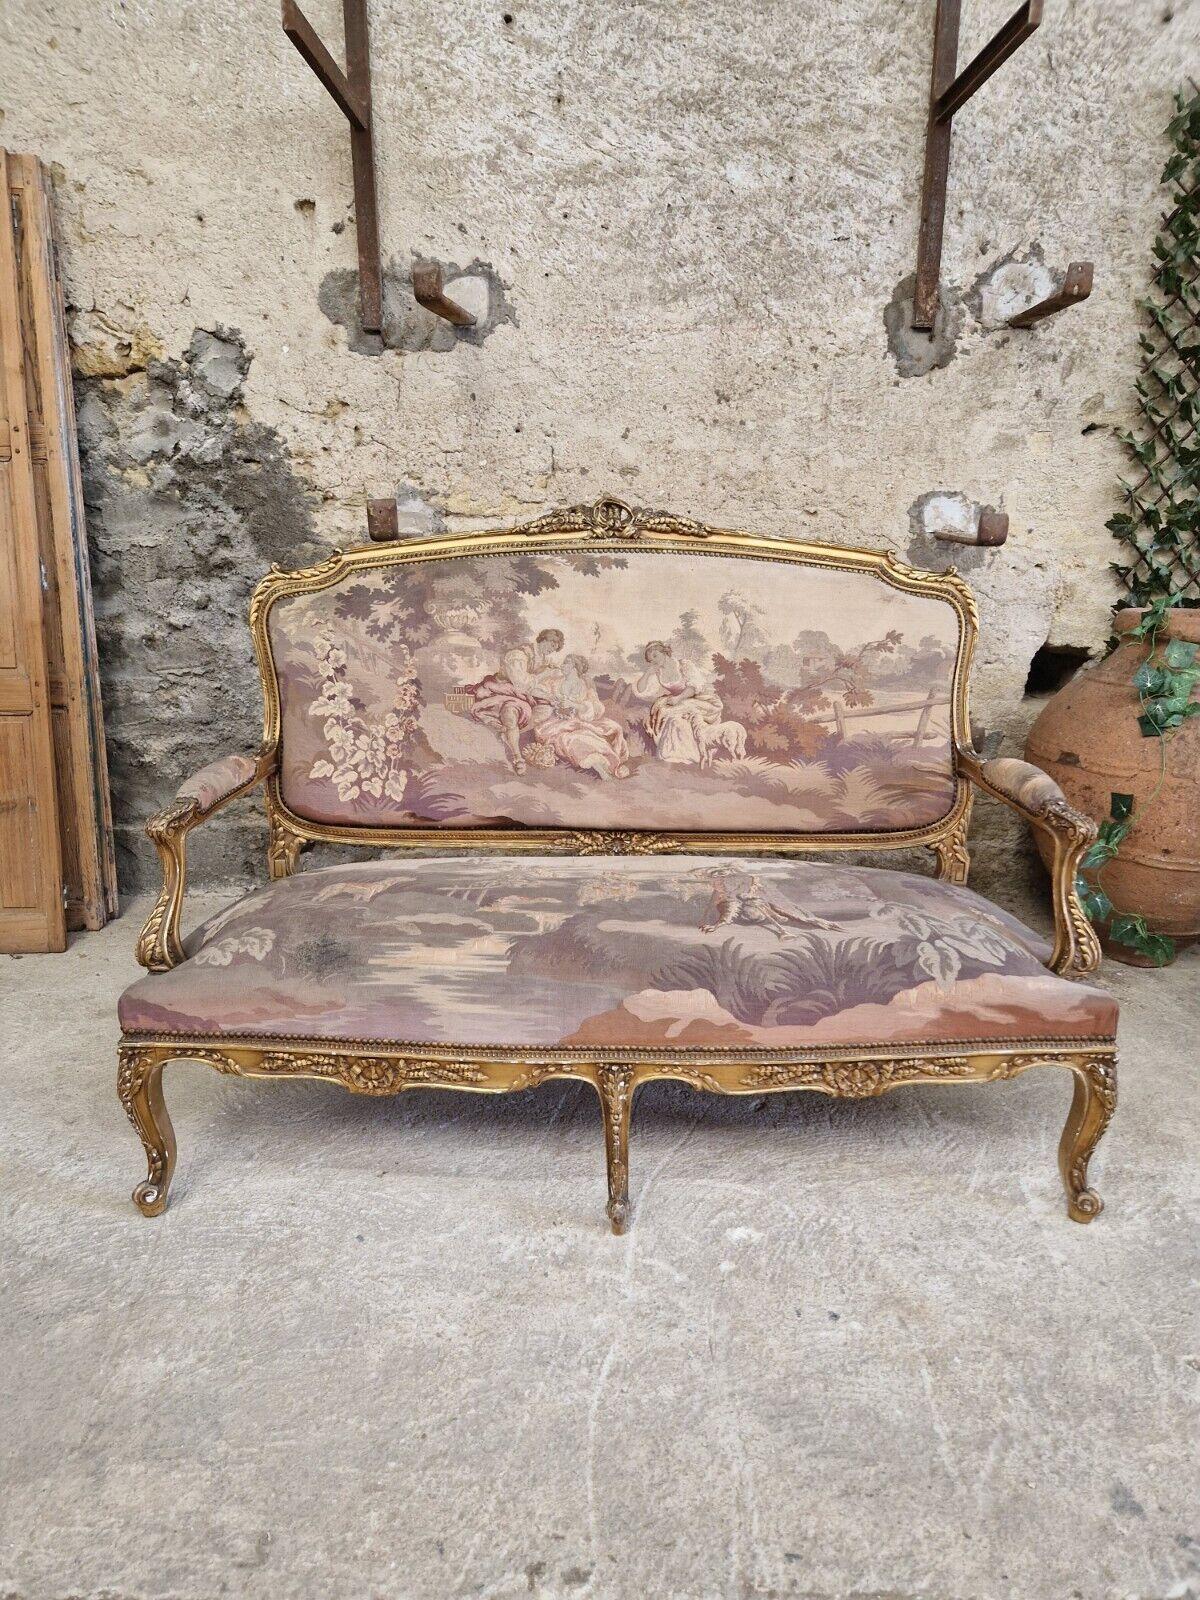 
We are delighted to offer for sale, this exquisite French Aubusson salon set is a stunning piece of antique furniture that will add elegance and charm to any room. The set includes a Louis XV giltwood sofa and a pair of armchairs, upholstered with